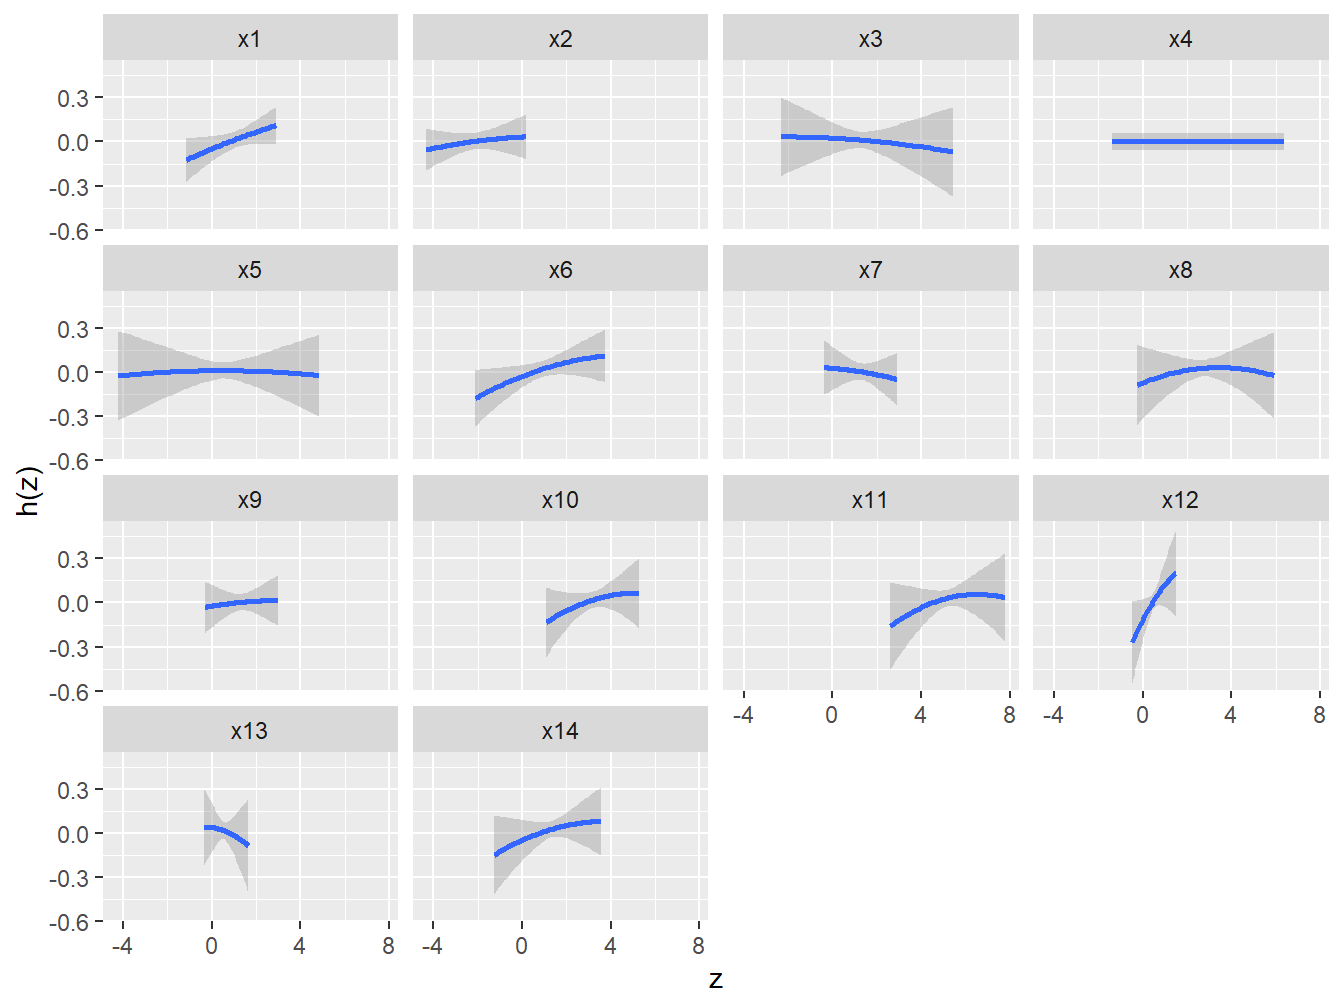 Univariate dose-response associations from BKMR in the simulated dataset